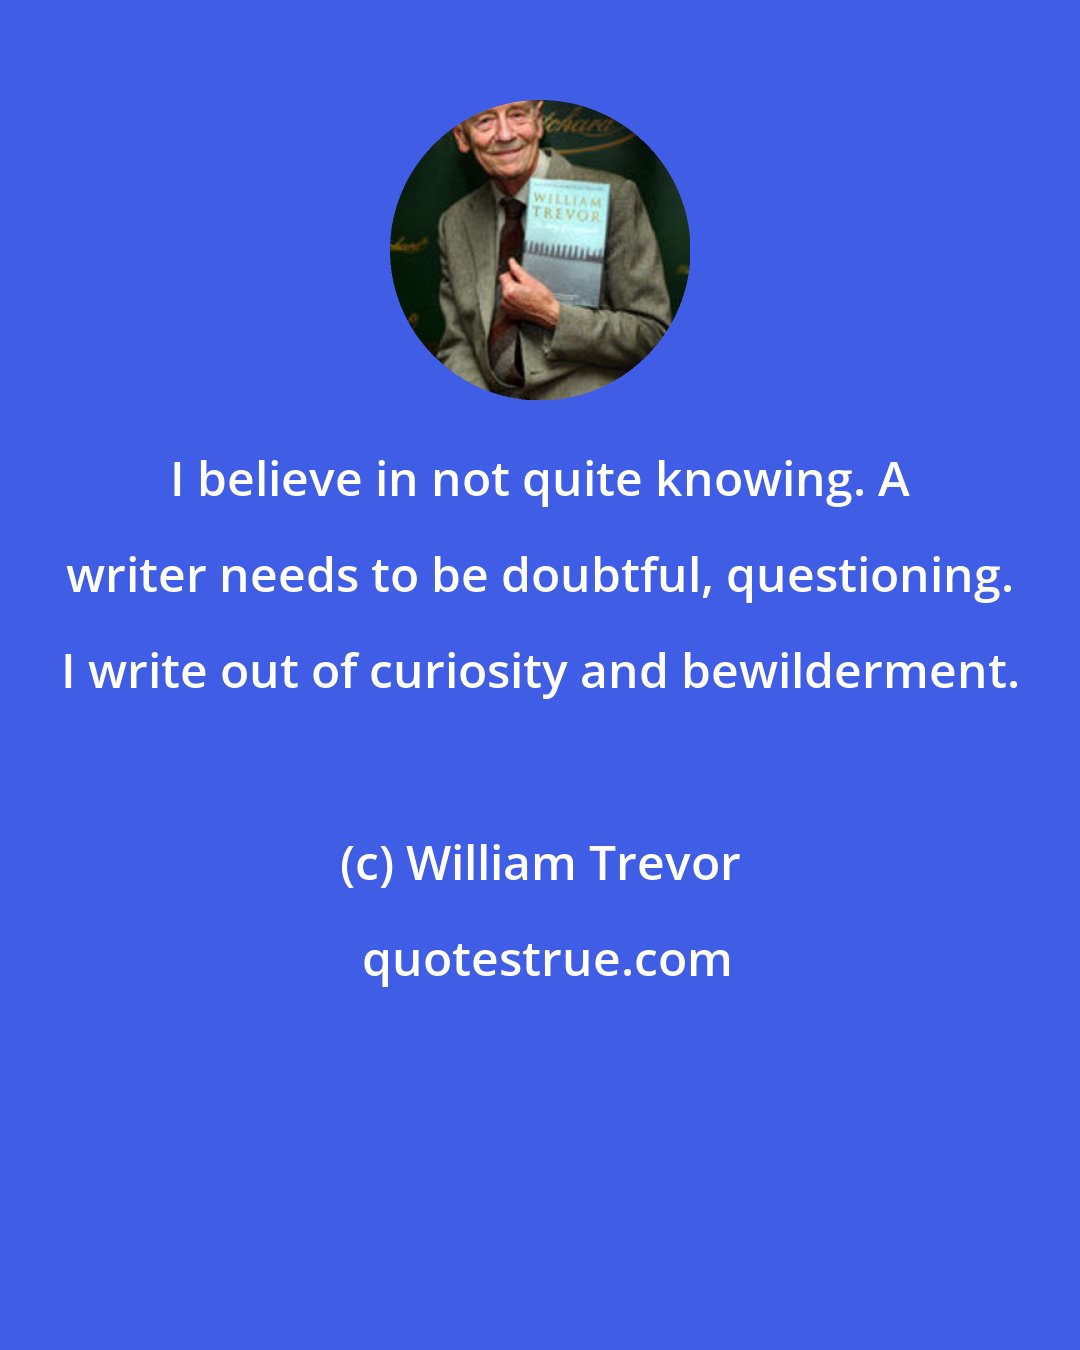 William Trevor: I believe in not quite knowing. A writer needs to be doubtful, questioning. I write out of curiosity and bewilderment.